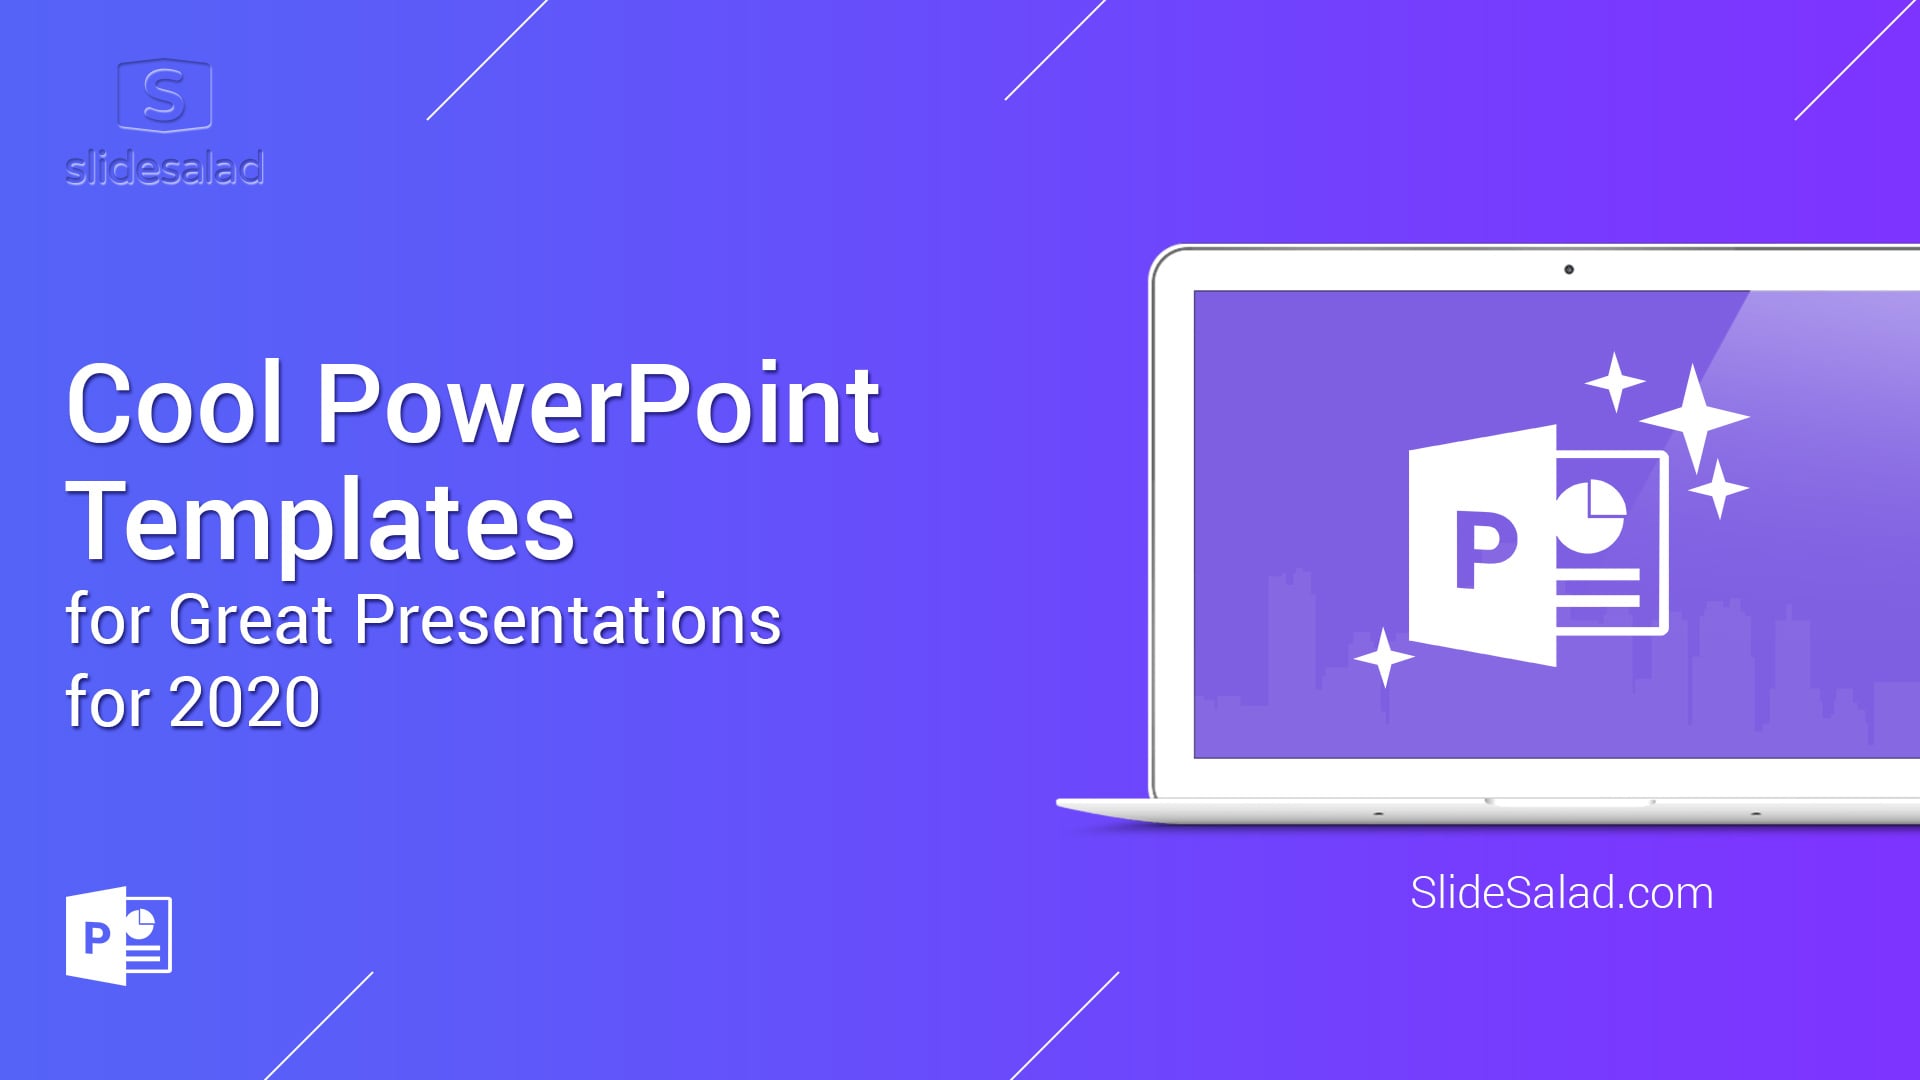 Cool PowerPoint Templates for Great Presentations for 2020